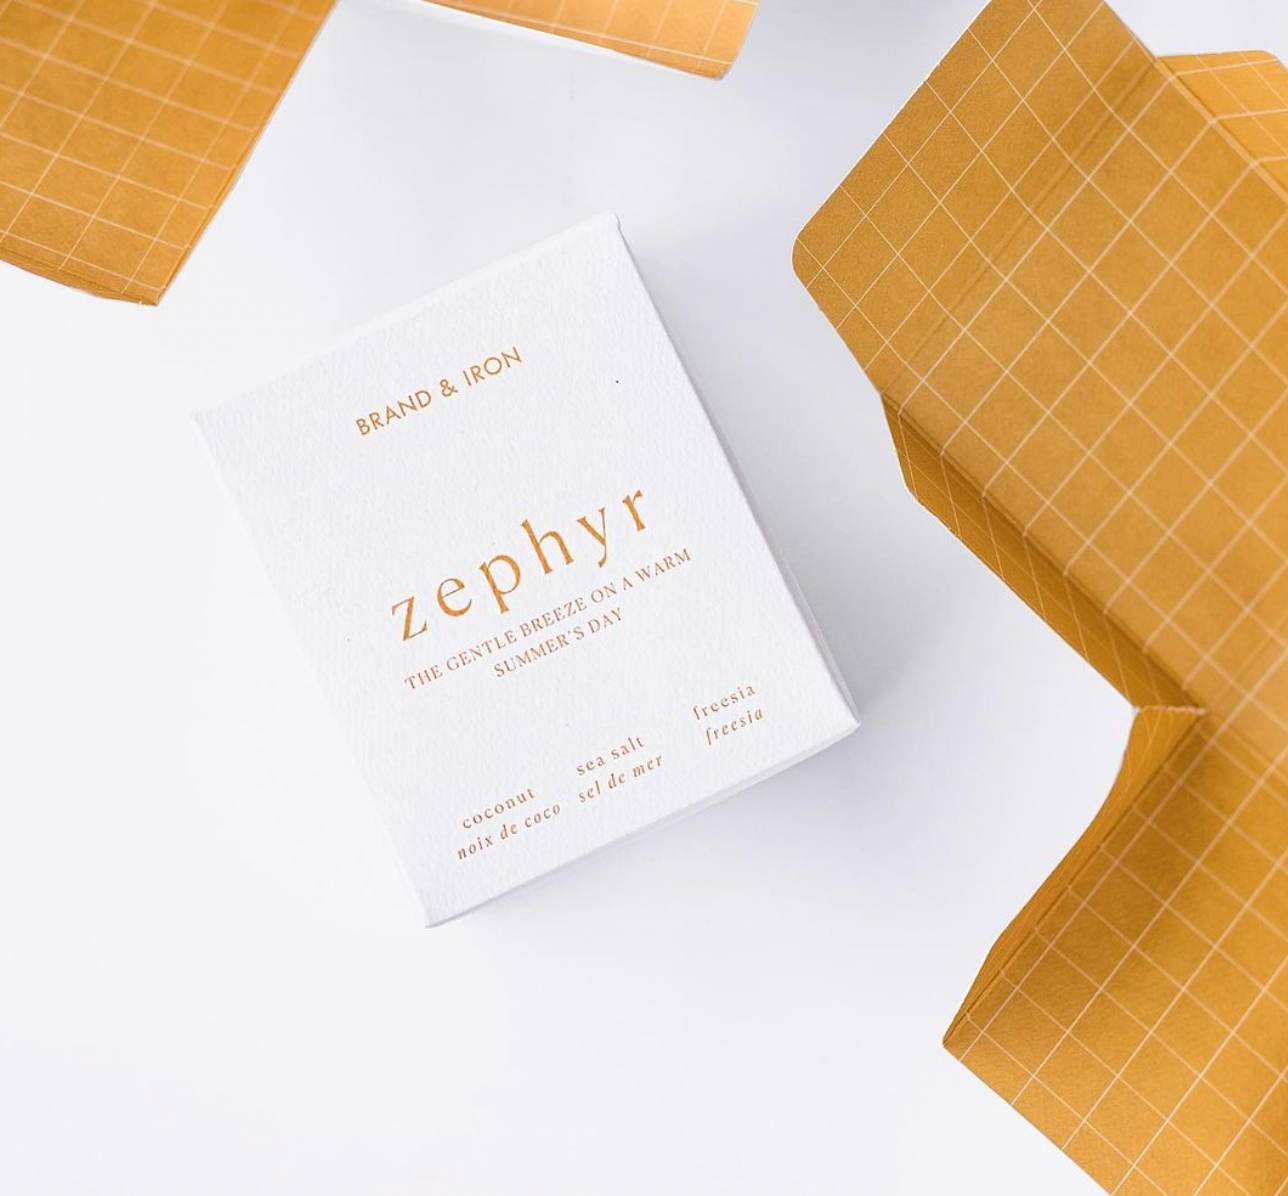 Laconic Collection: Zephyr Brand & Iron